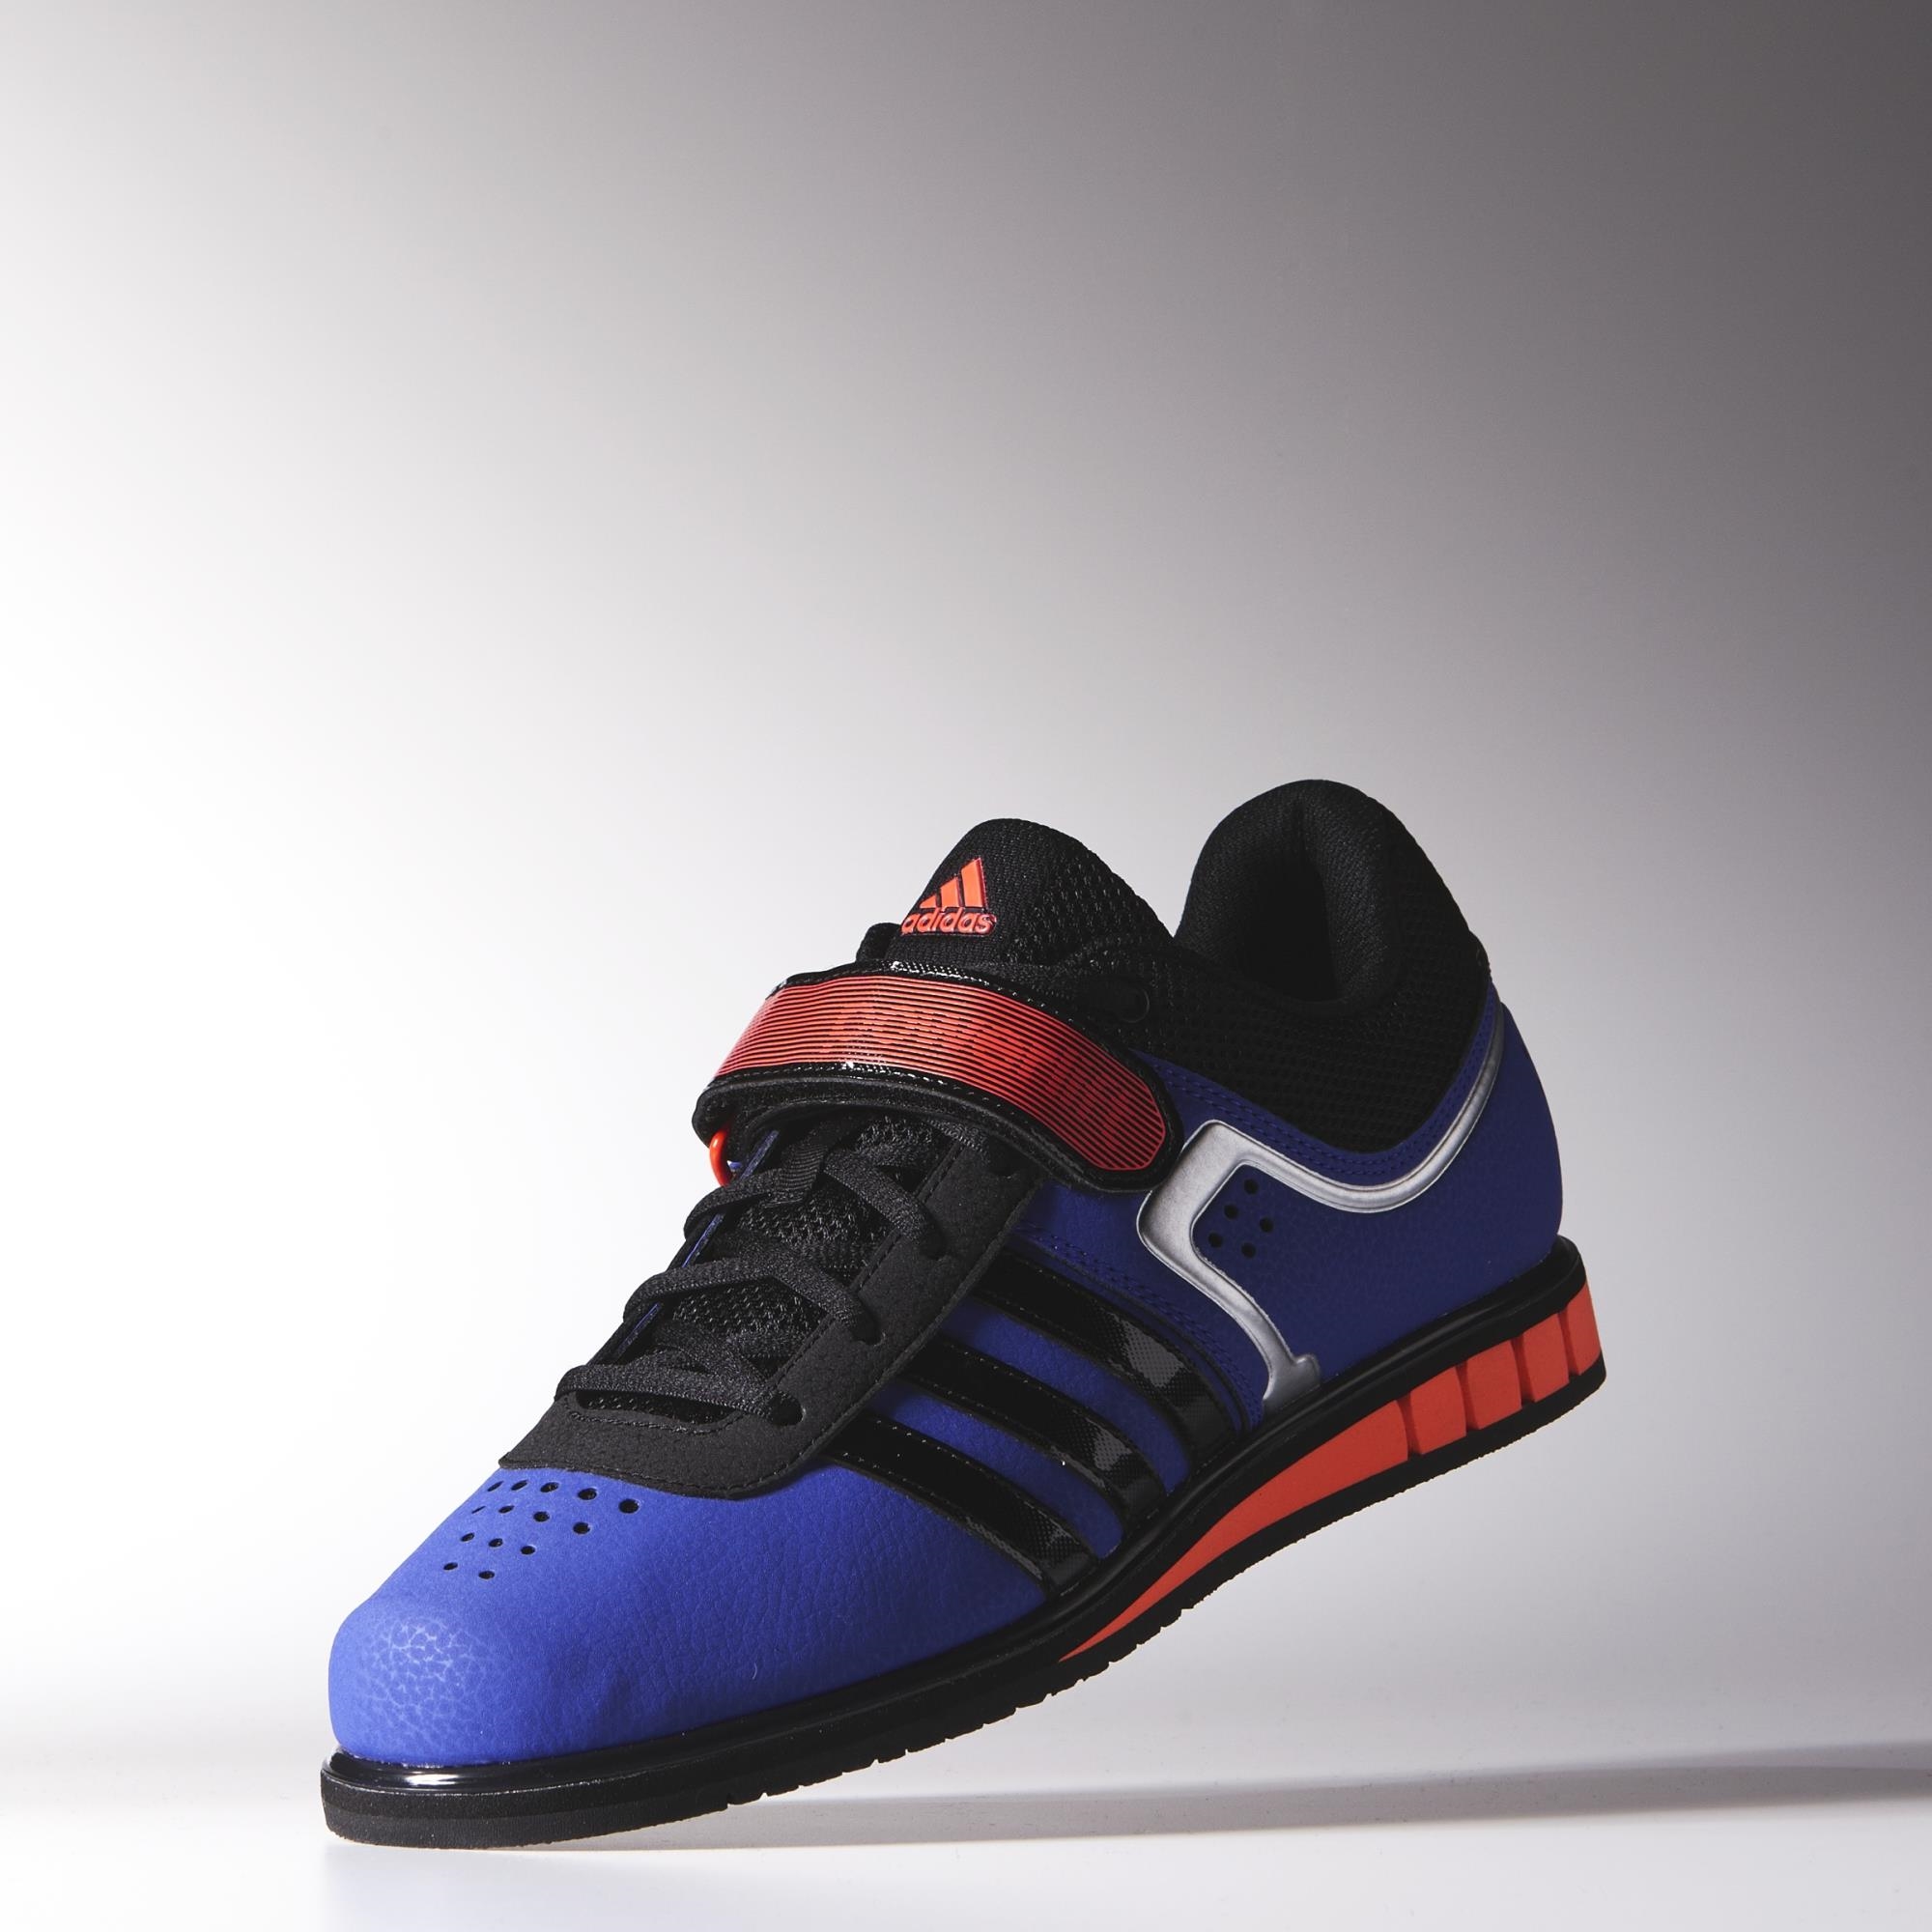 Adidas Powerlift 2.0 - Blue - Weightlifting Shoes